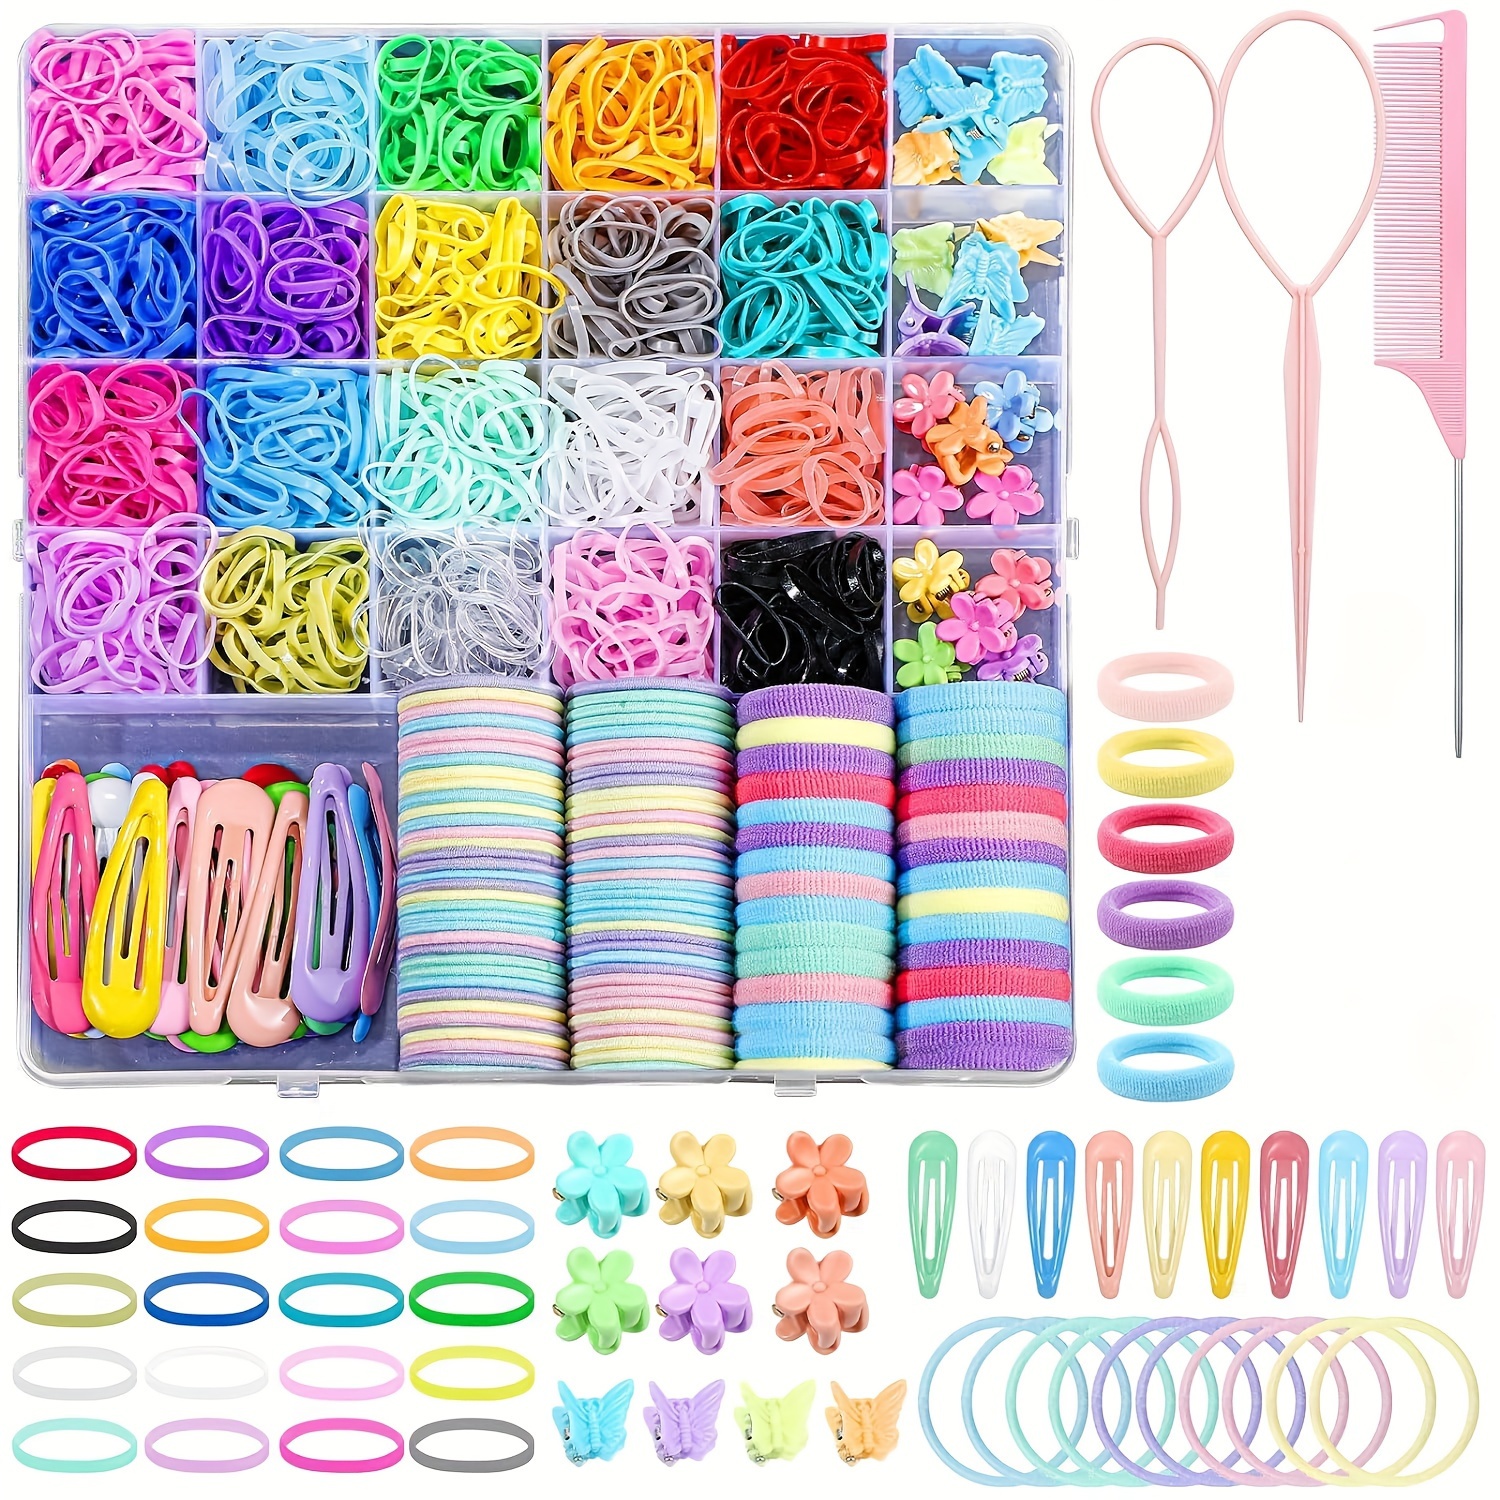 

1543-piece Hair Accessory Kit: Elastic Bands In 20 Colors, Cotton Ties, Styling Tools & Butterfly Clips - Cute & Simple Style For Teens & Up Hair Accessories For Women Hair Accessories